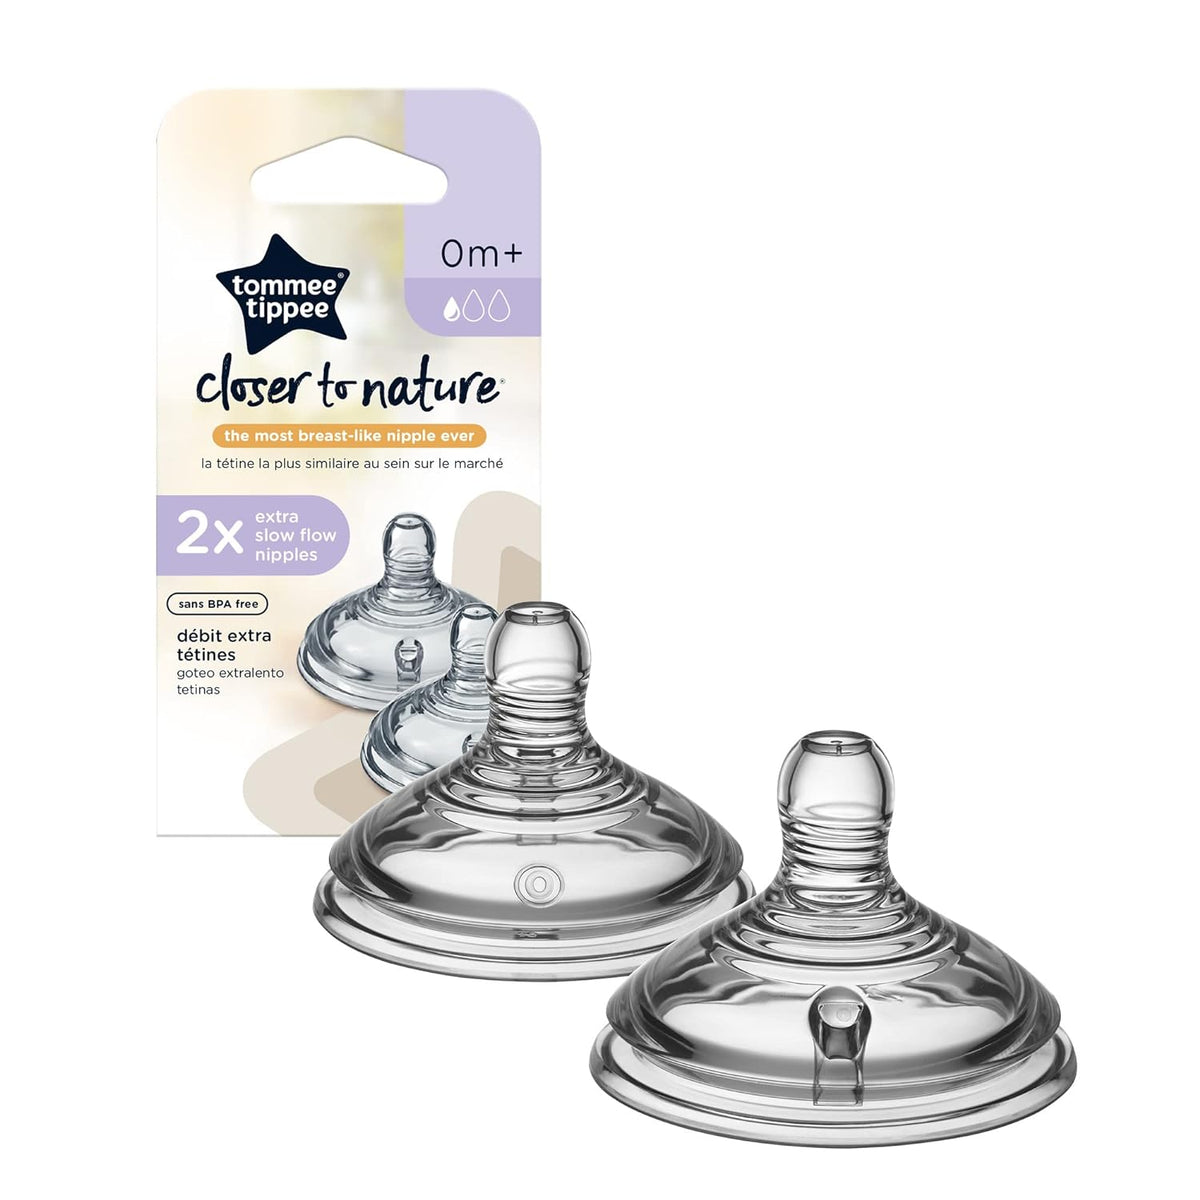 TOMMEE TIPPEE CLOSER TO NATURE NIPPLES - EXTRA SLOW FLOW - 2 PK